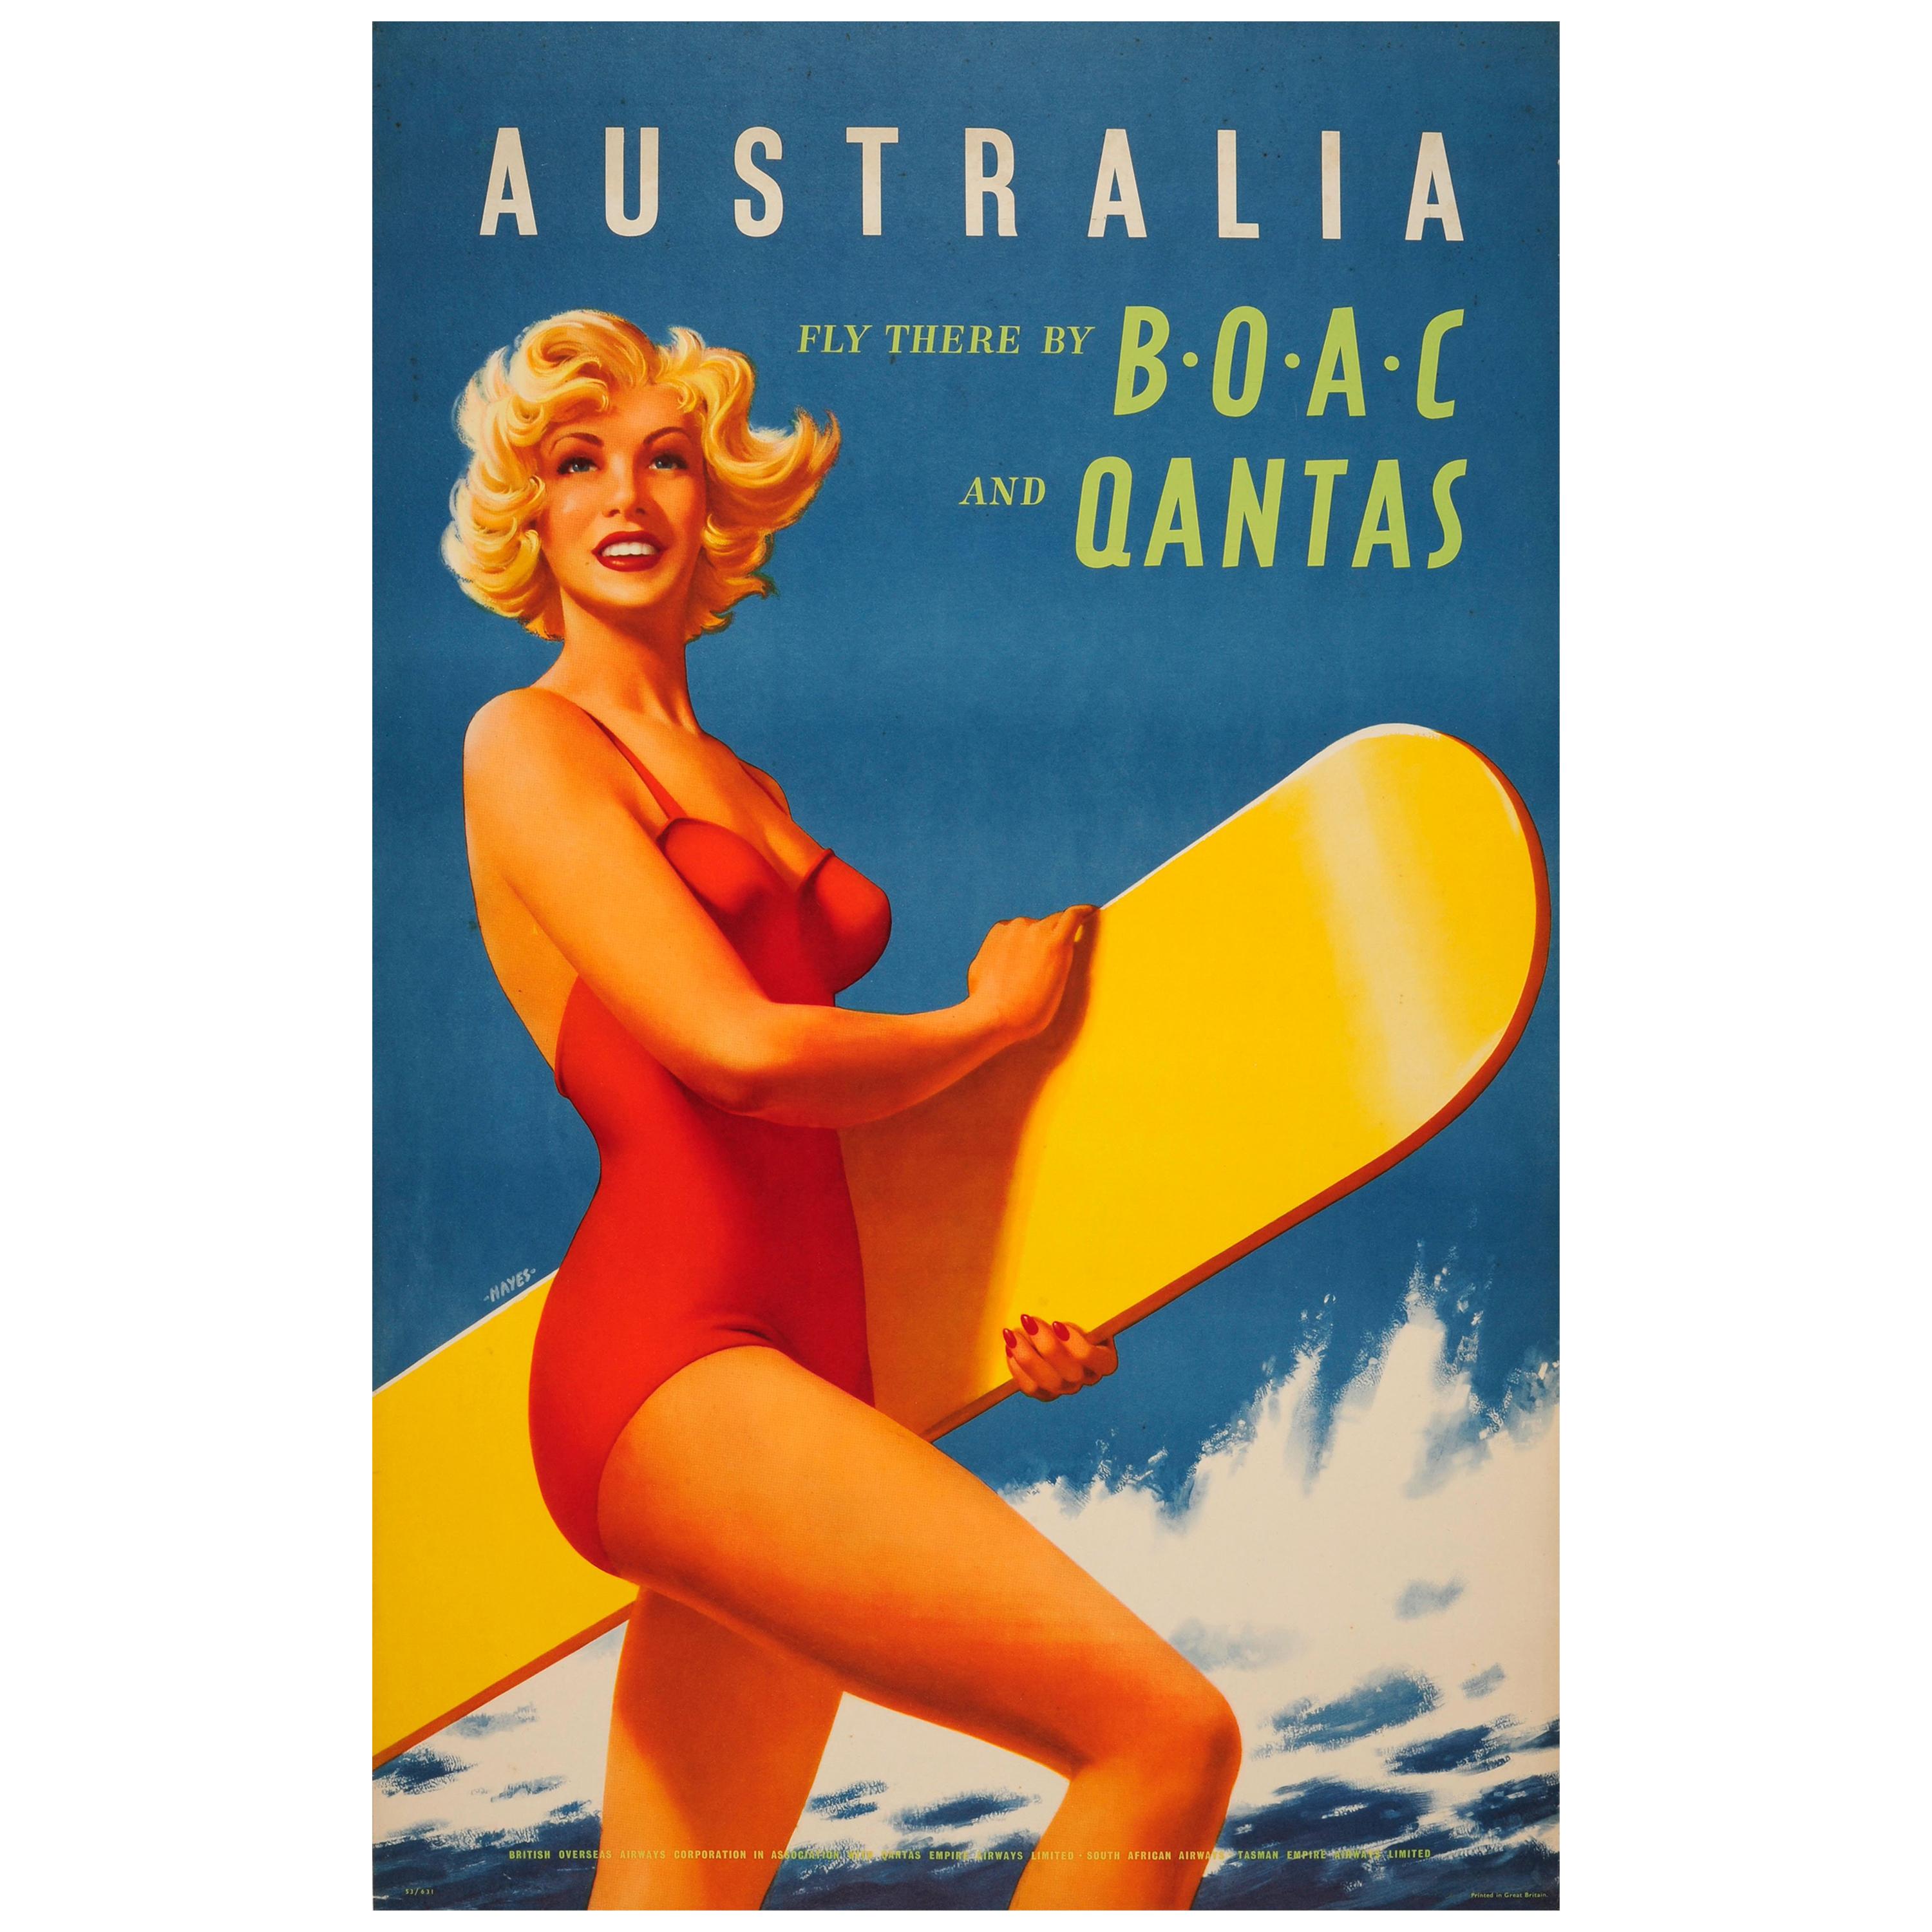 Original Vintage Australia Fly There by BOAC & Qantas Travel Poster Ft. Surfer